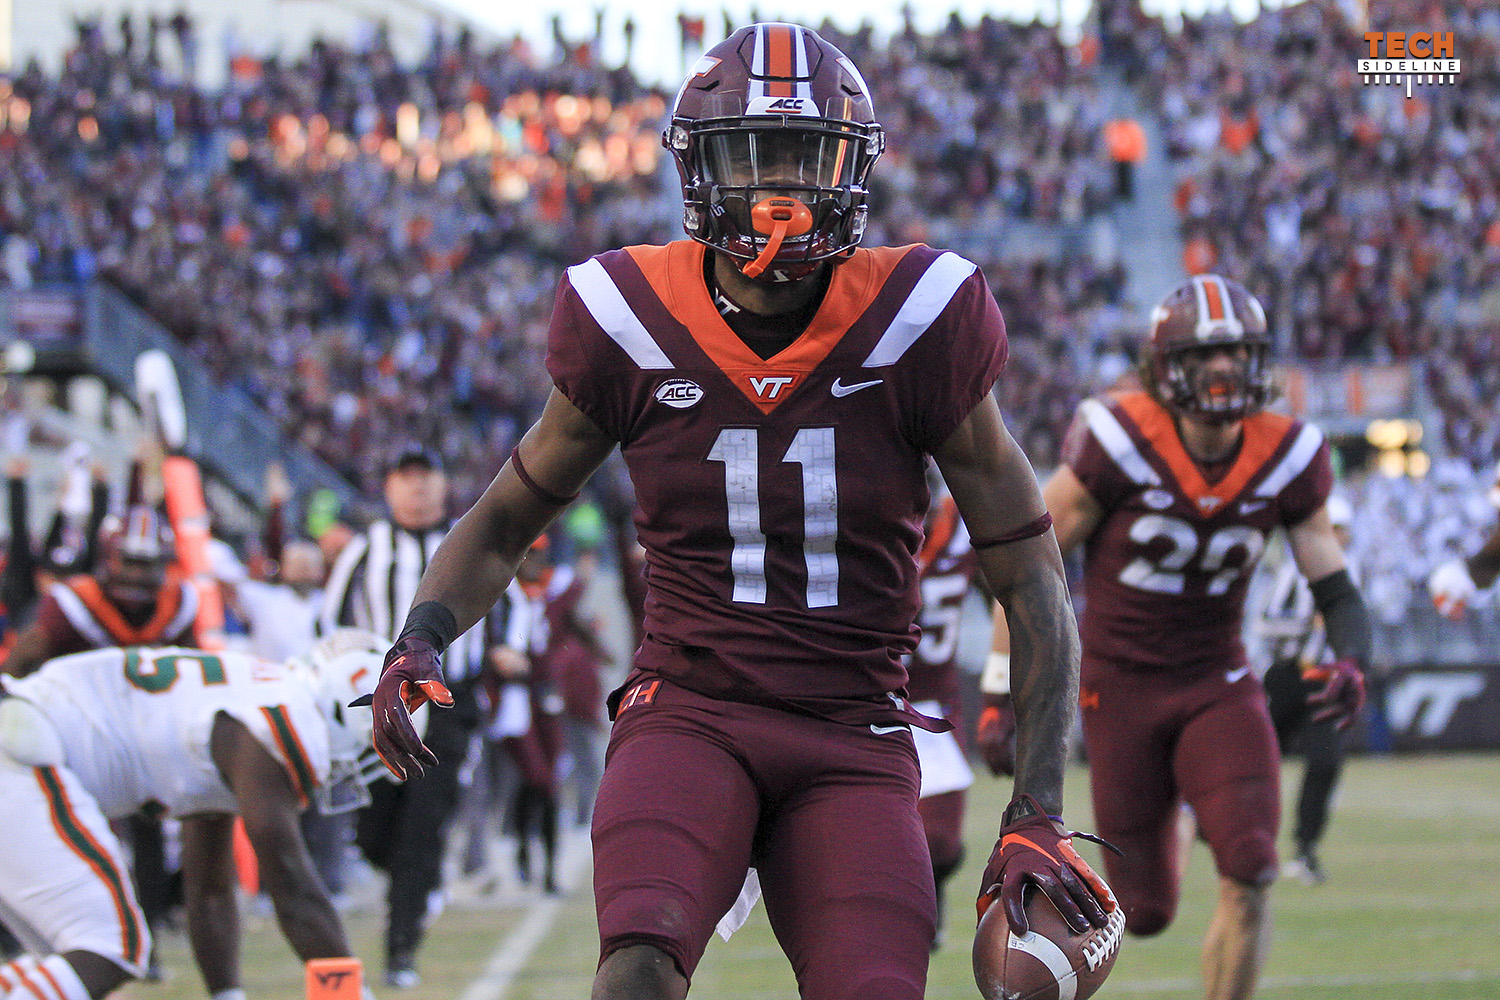 Virginia Tech Football Players Amped and Ready to Go | TechSideline.com